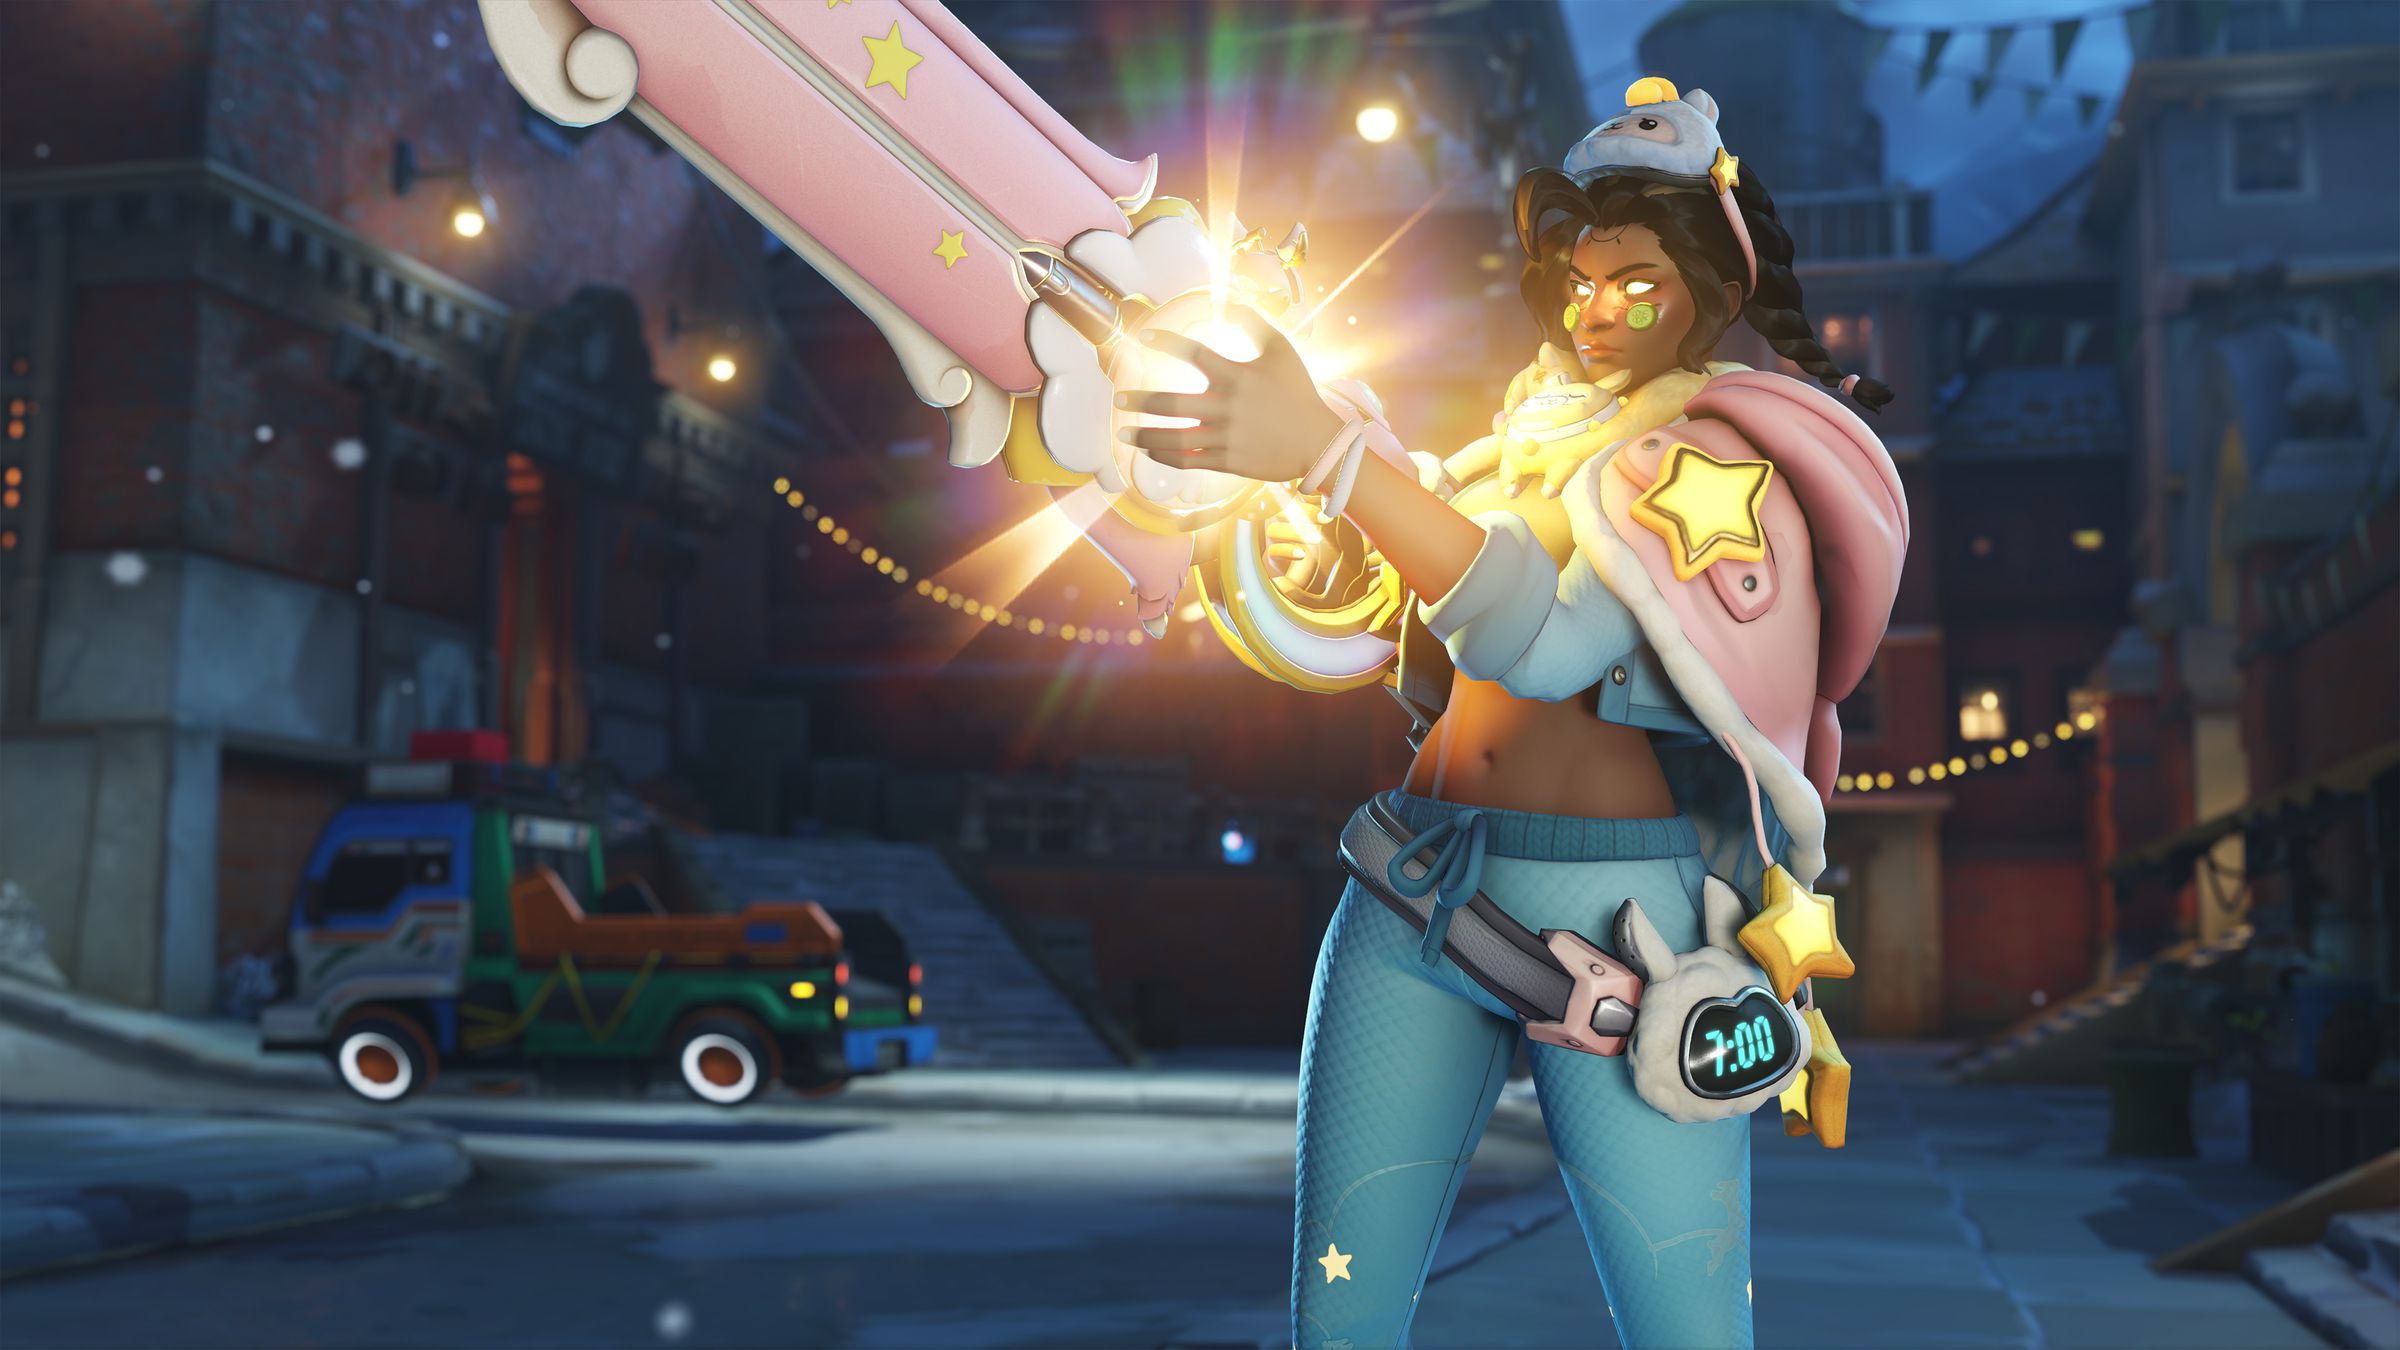 Screenshot from Overwatch 2 featuring Illari in her llama pajama skin featuring a blue and pink pastel color scheme, a llama sleep mask and blanket wrapped around her shoulders. A llama shaped alarm clock on her hip and star decals on her shoulders